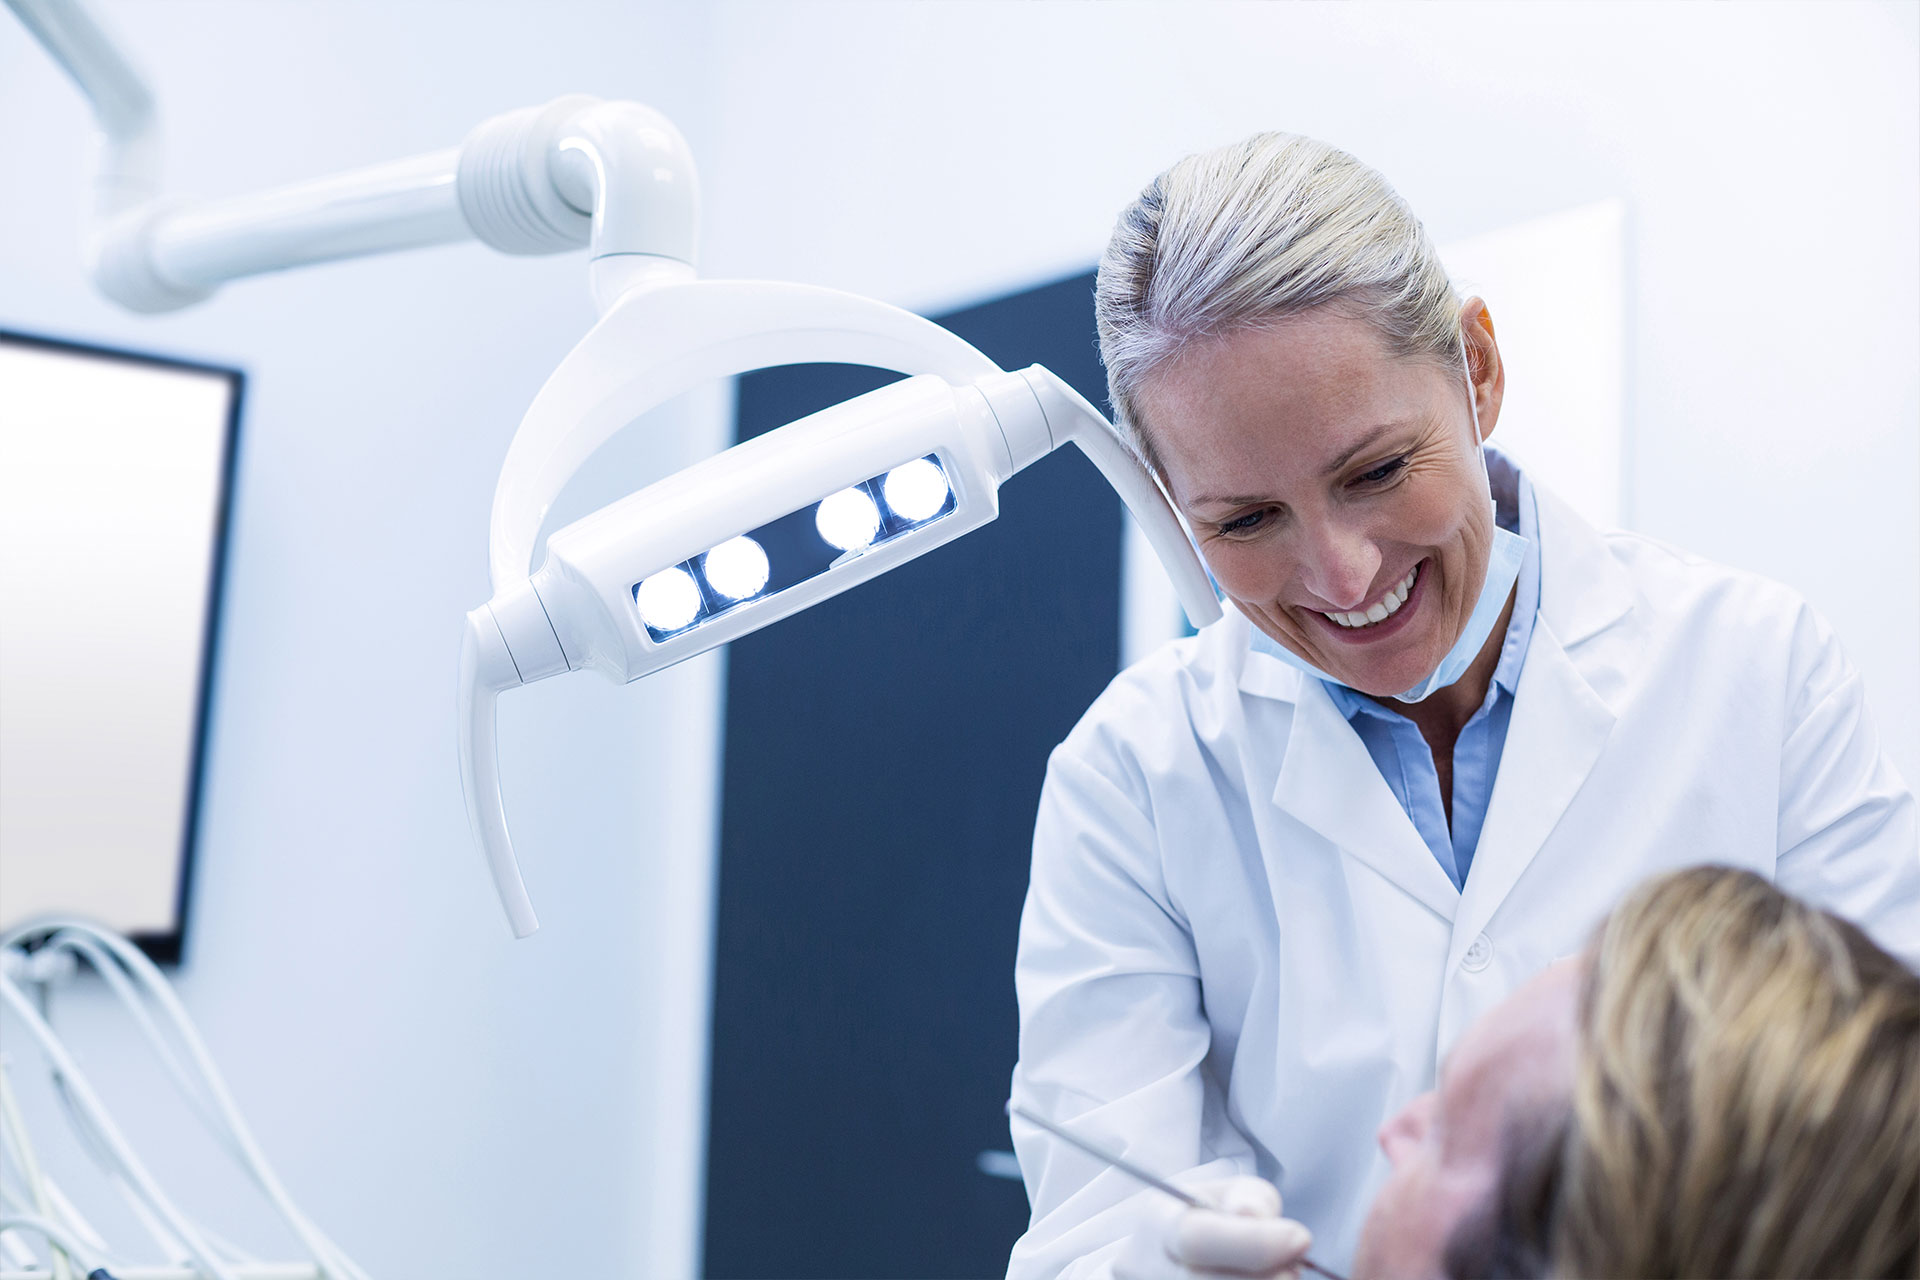 New nice guidelines aim to improve quality of dentistry provision in the UK